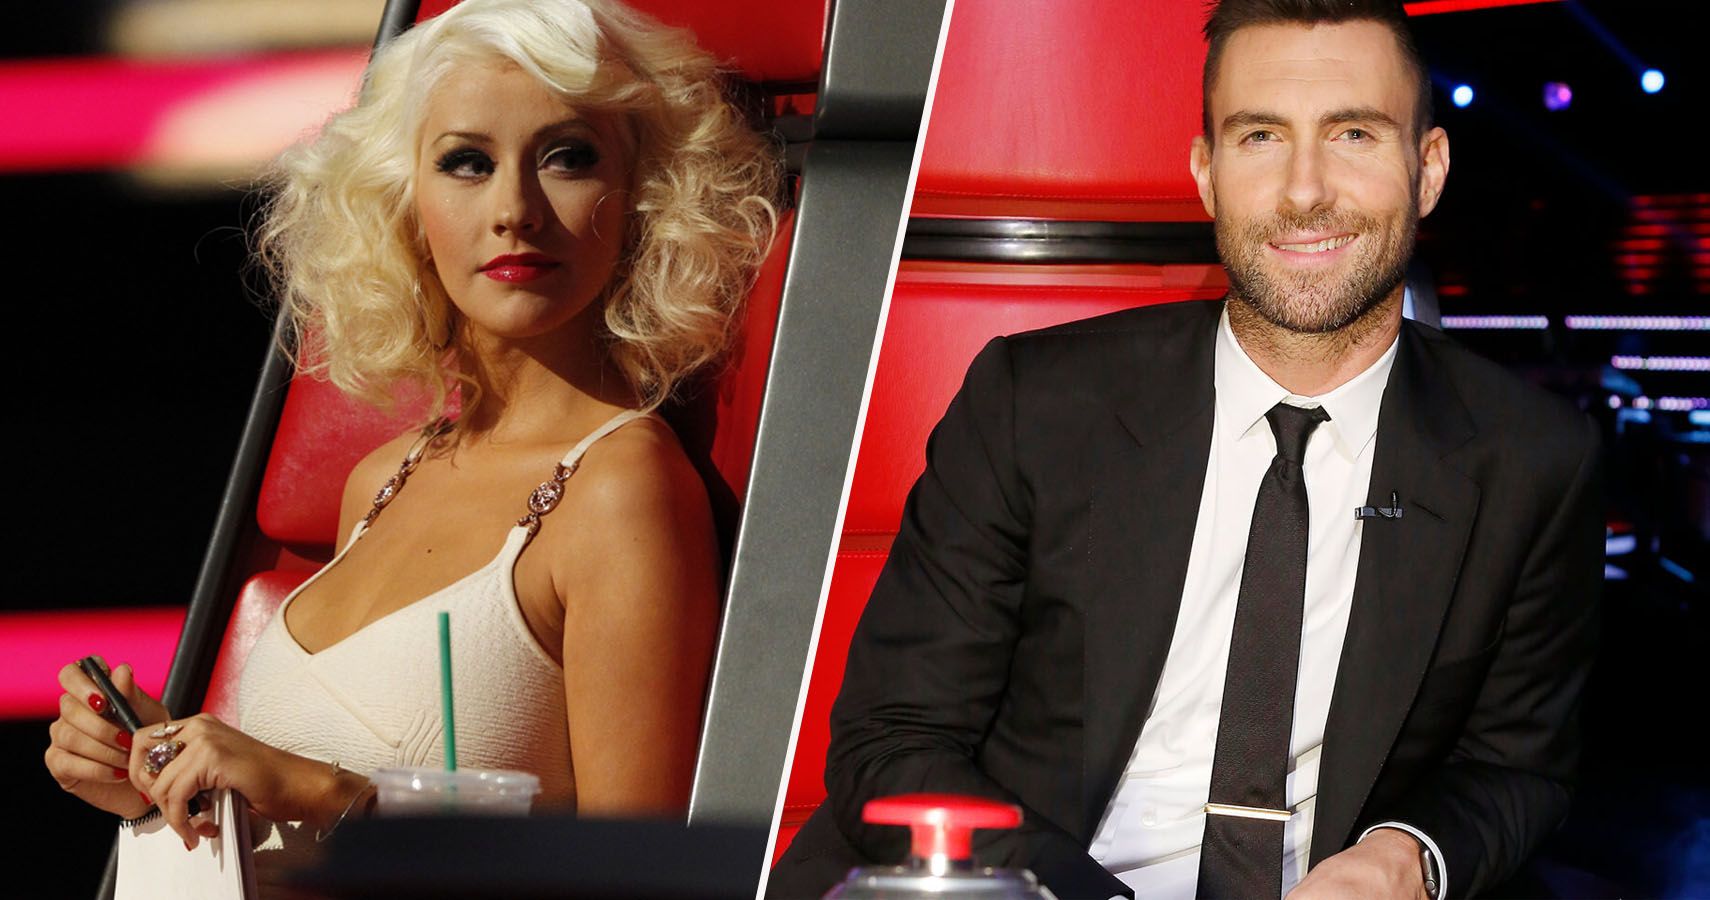 What Adam Levine And Other Judges From The Voice Have Said About The Show 6610